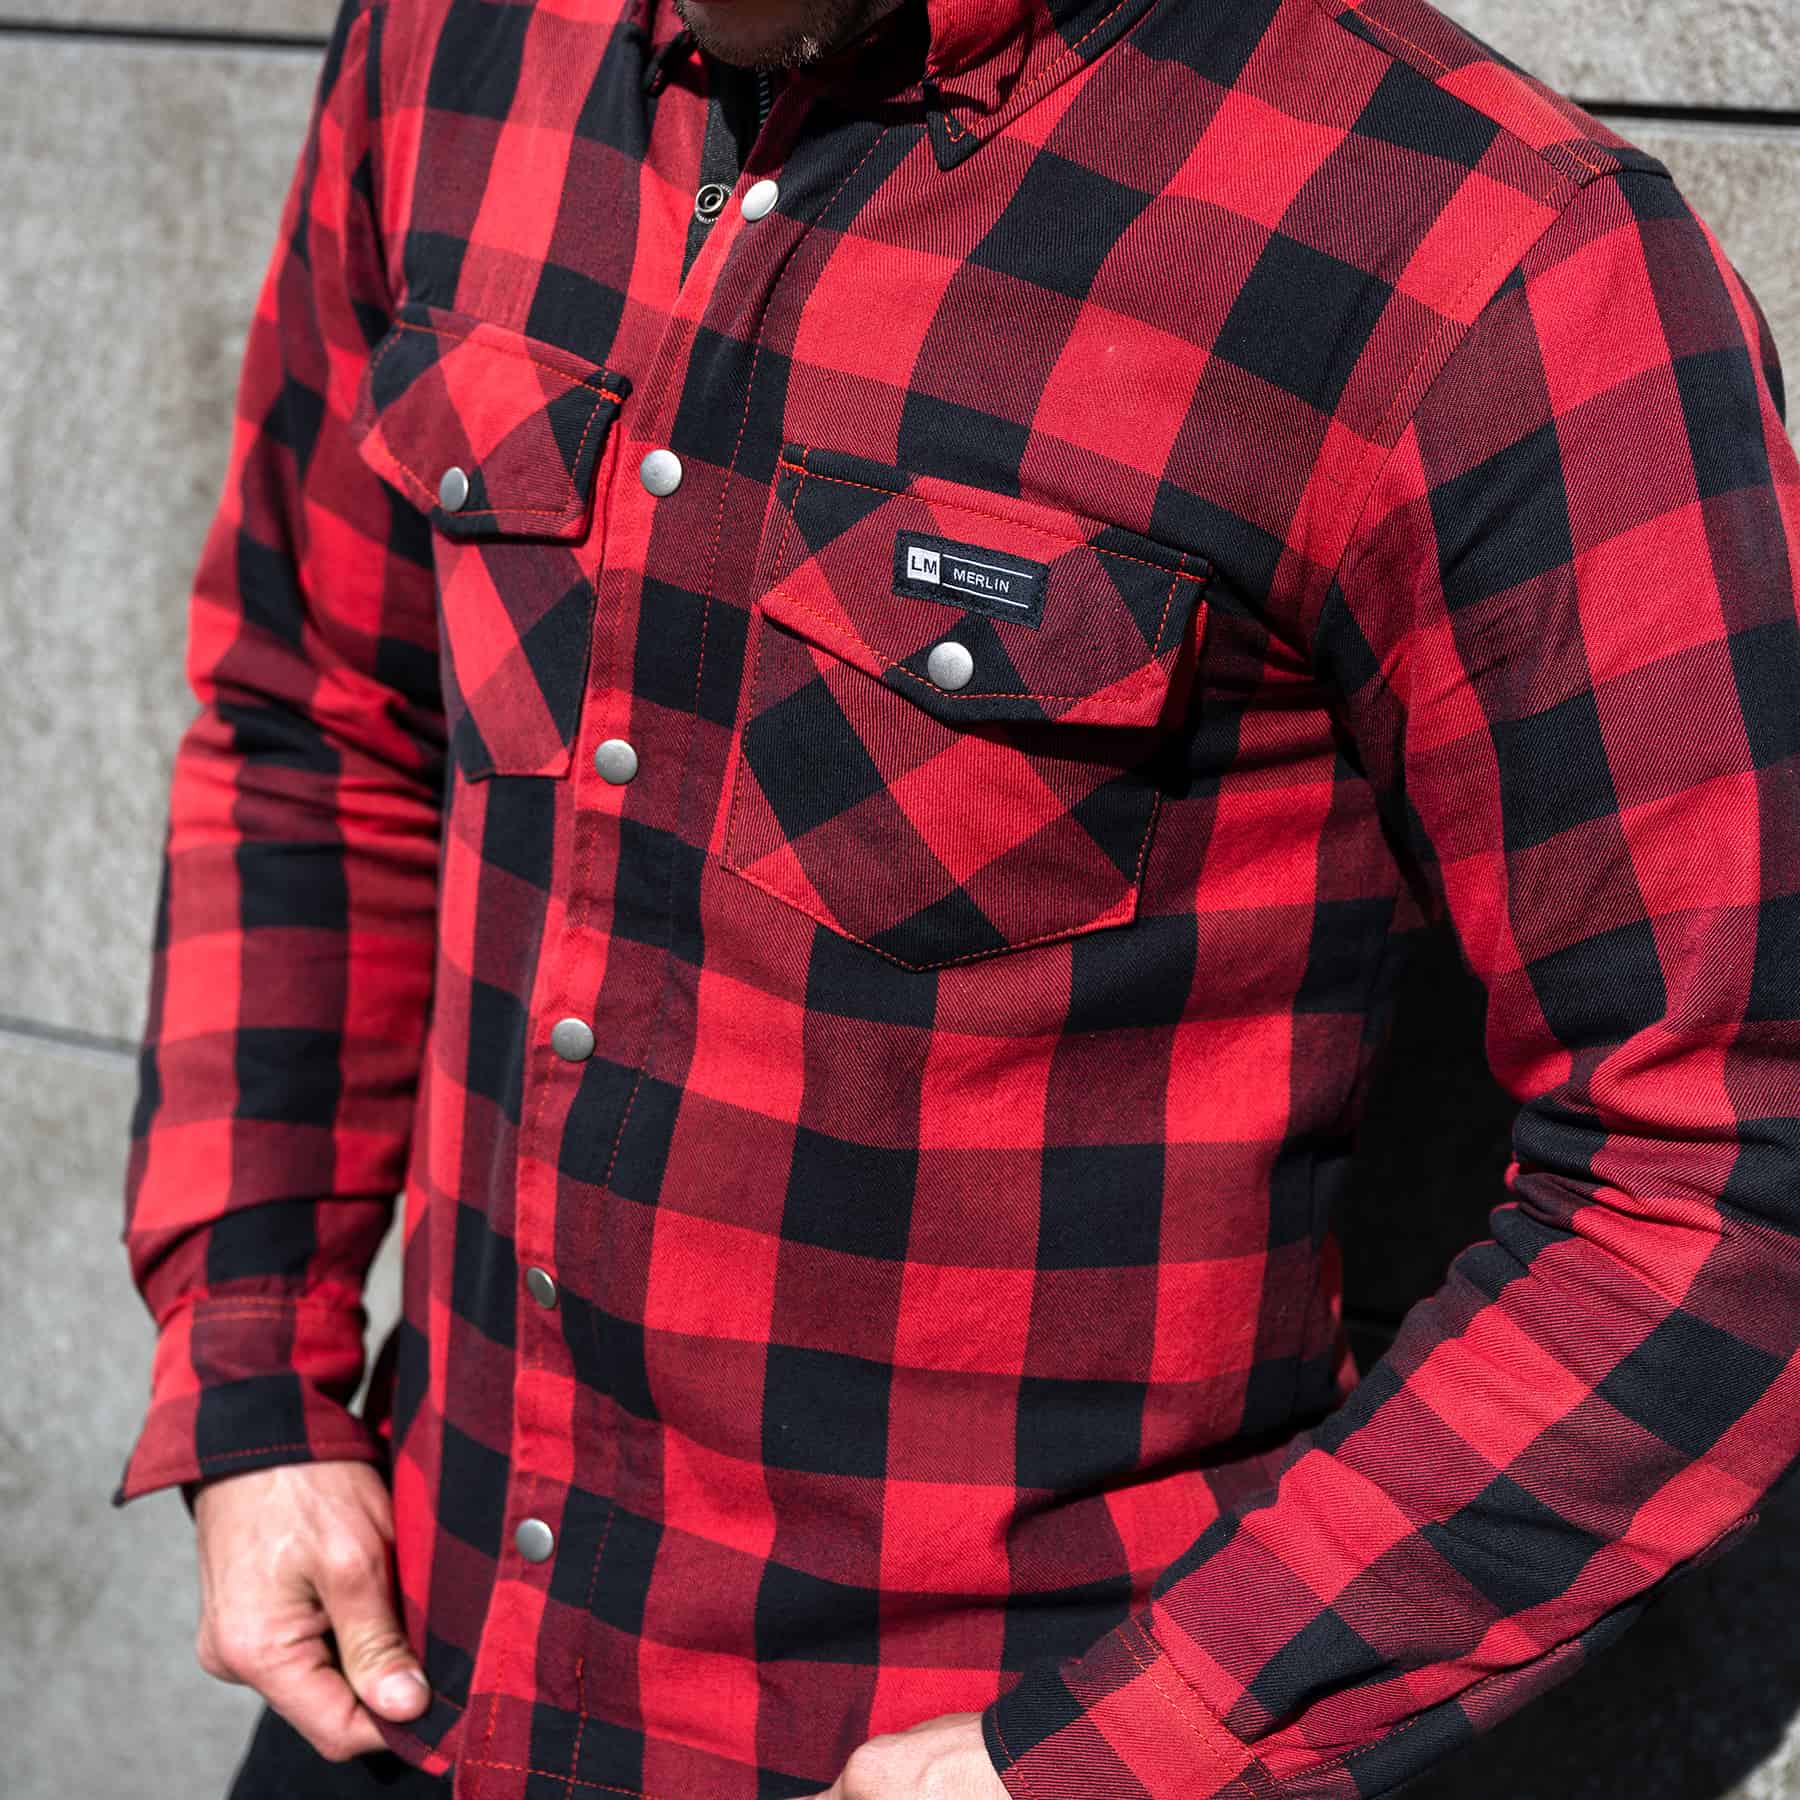 Merlin Axe Riding Shirt in red/black